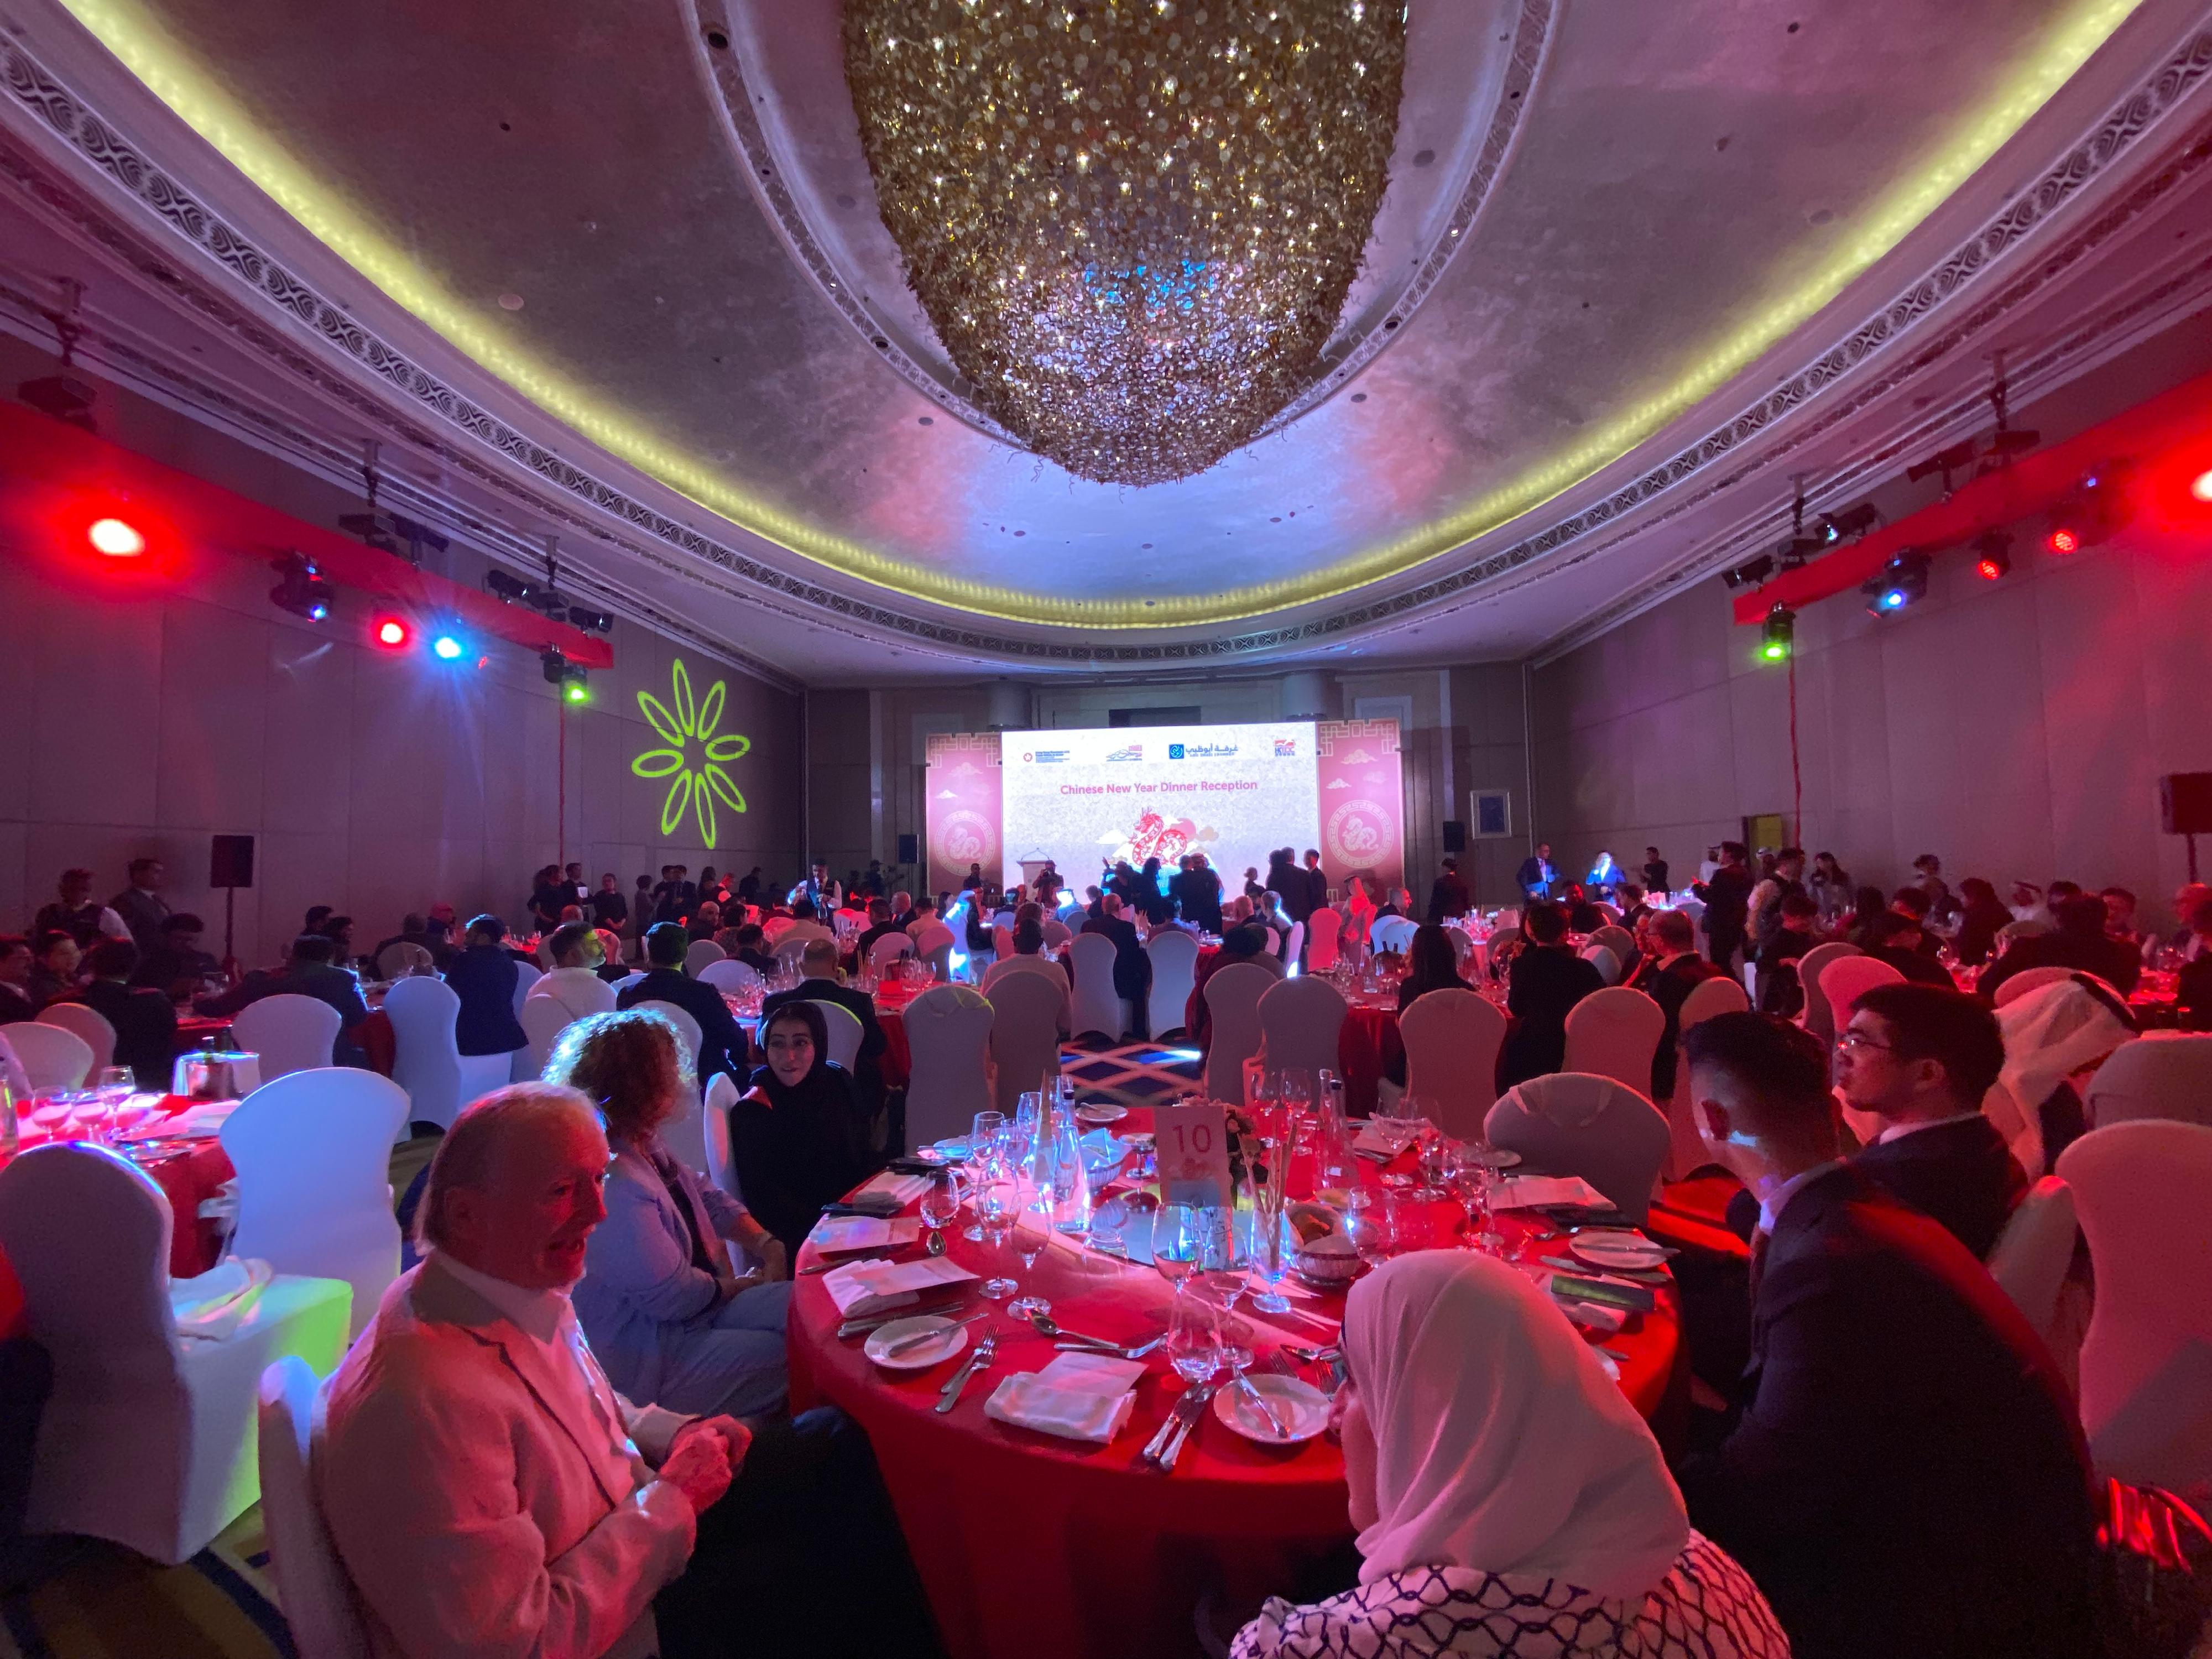 The Hong Kong Economic and Trade Office in Dubai, in collaboration with the Hong Kong Trade Development Council and the Abu Dhabi Chamber of Commerce and Industry, hosted a Chinese New Year dinner reception in Abu Dhabi, the United Arab Emirates (UAE), on February 28 (Abu Dhabi time). About 150 guests attended the event, including representatives from the local government and business sectors, as well as members of the Hong Kong community in the UAE.